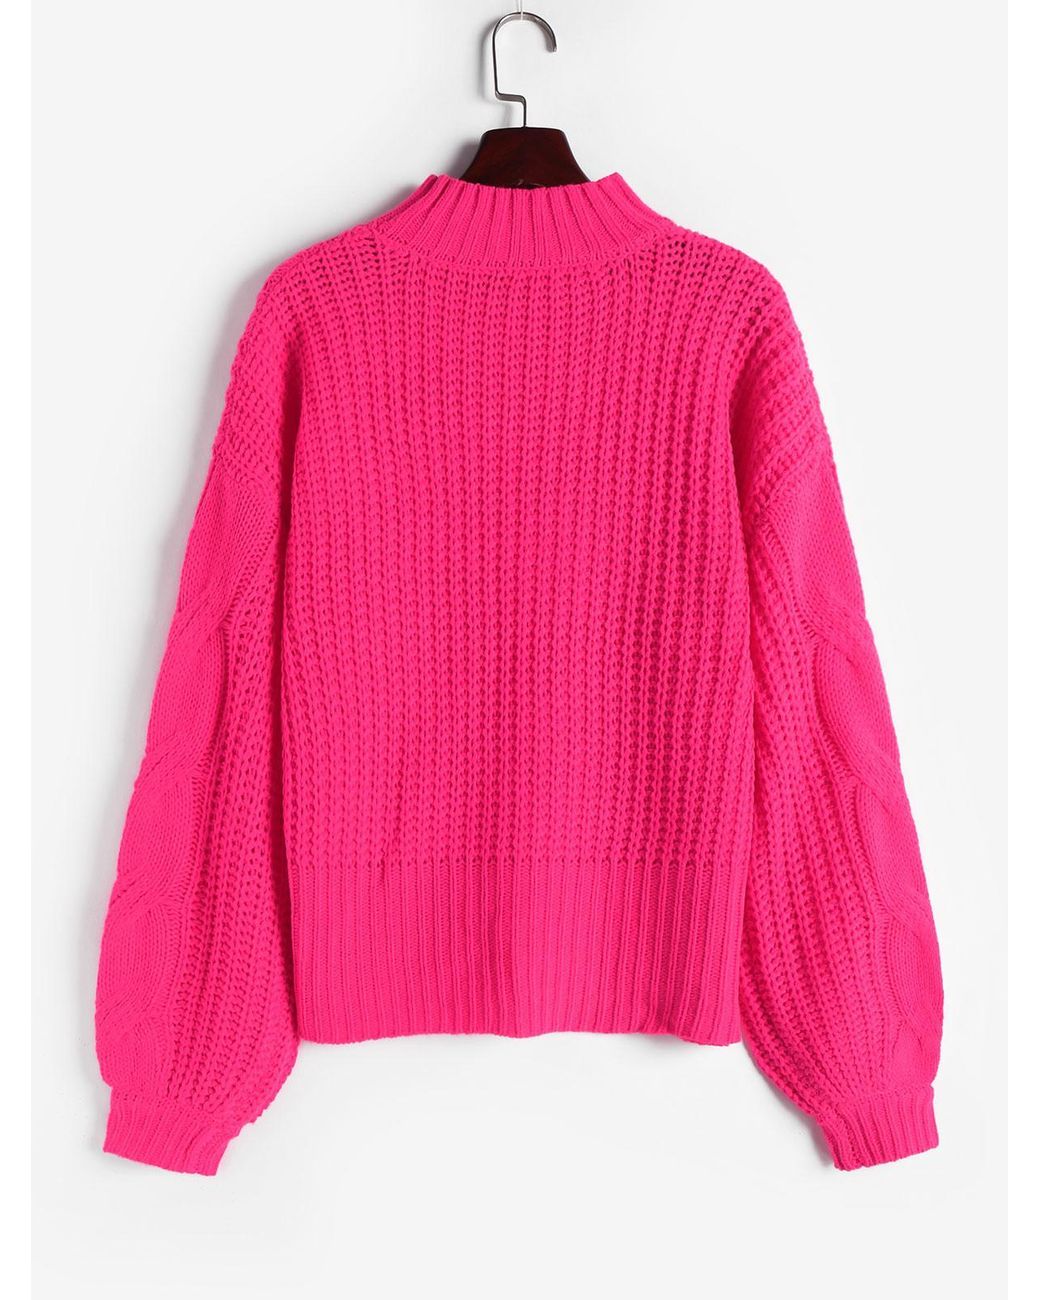 Zaful High Neck Cable Knit Neon Hot Pink Sweater | Lyst